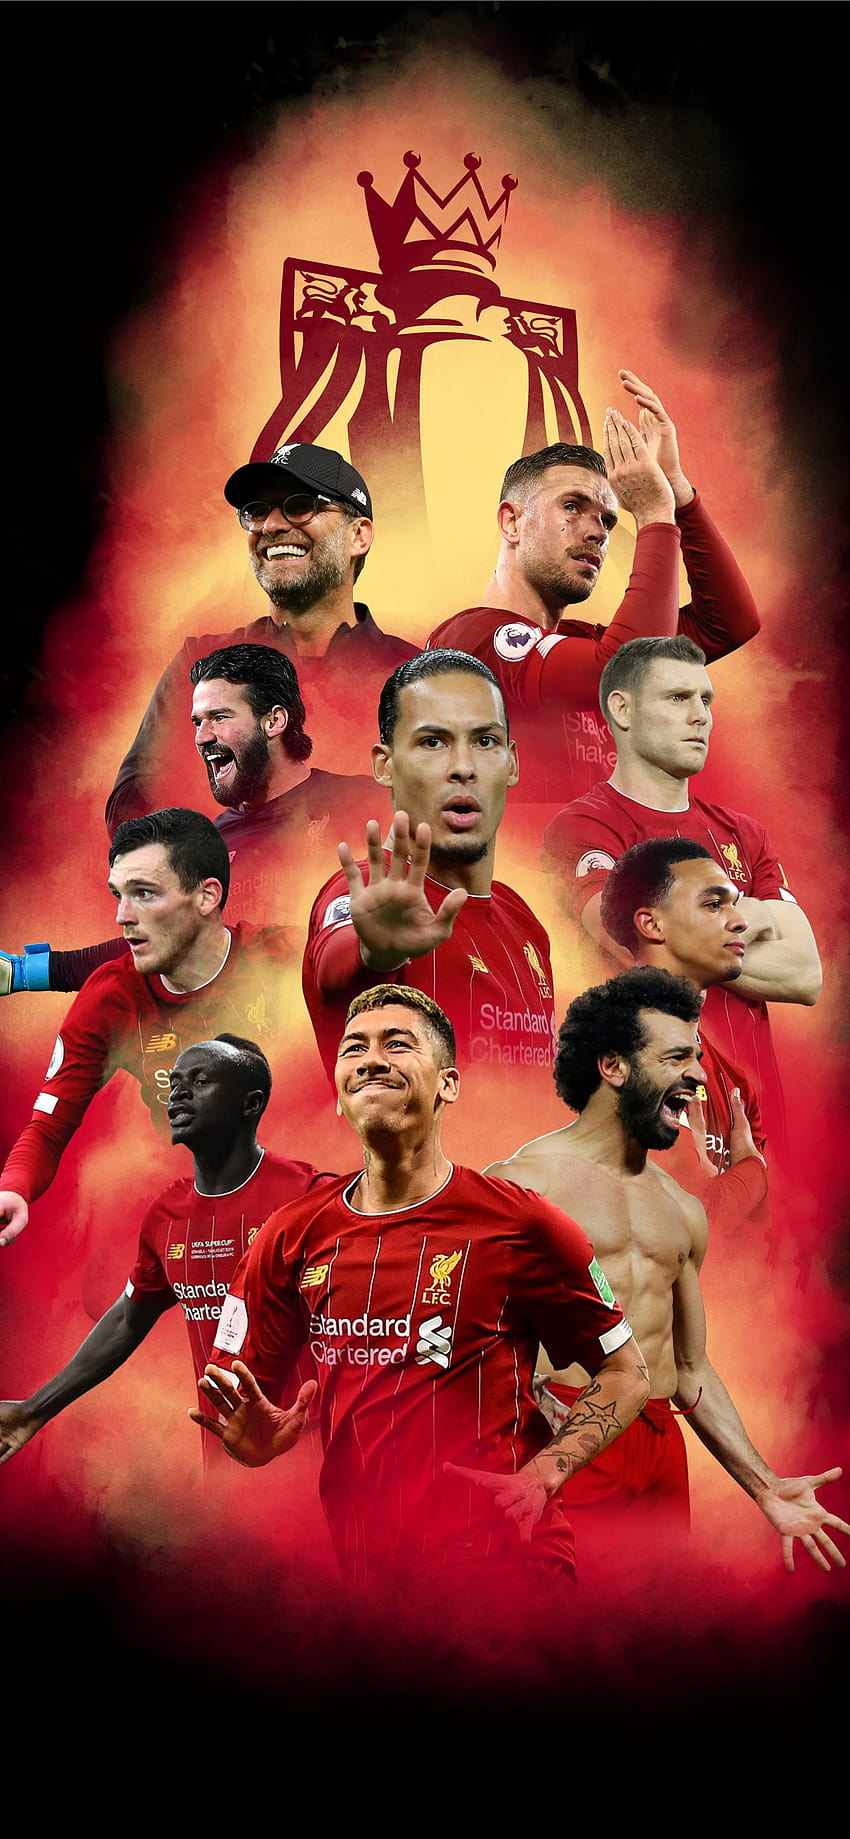 Best Liverpool fc iPhone, liverpool fc players HD phone wallpaper